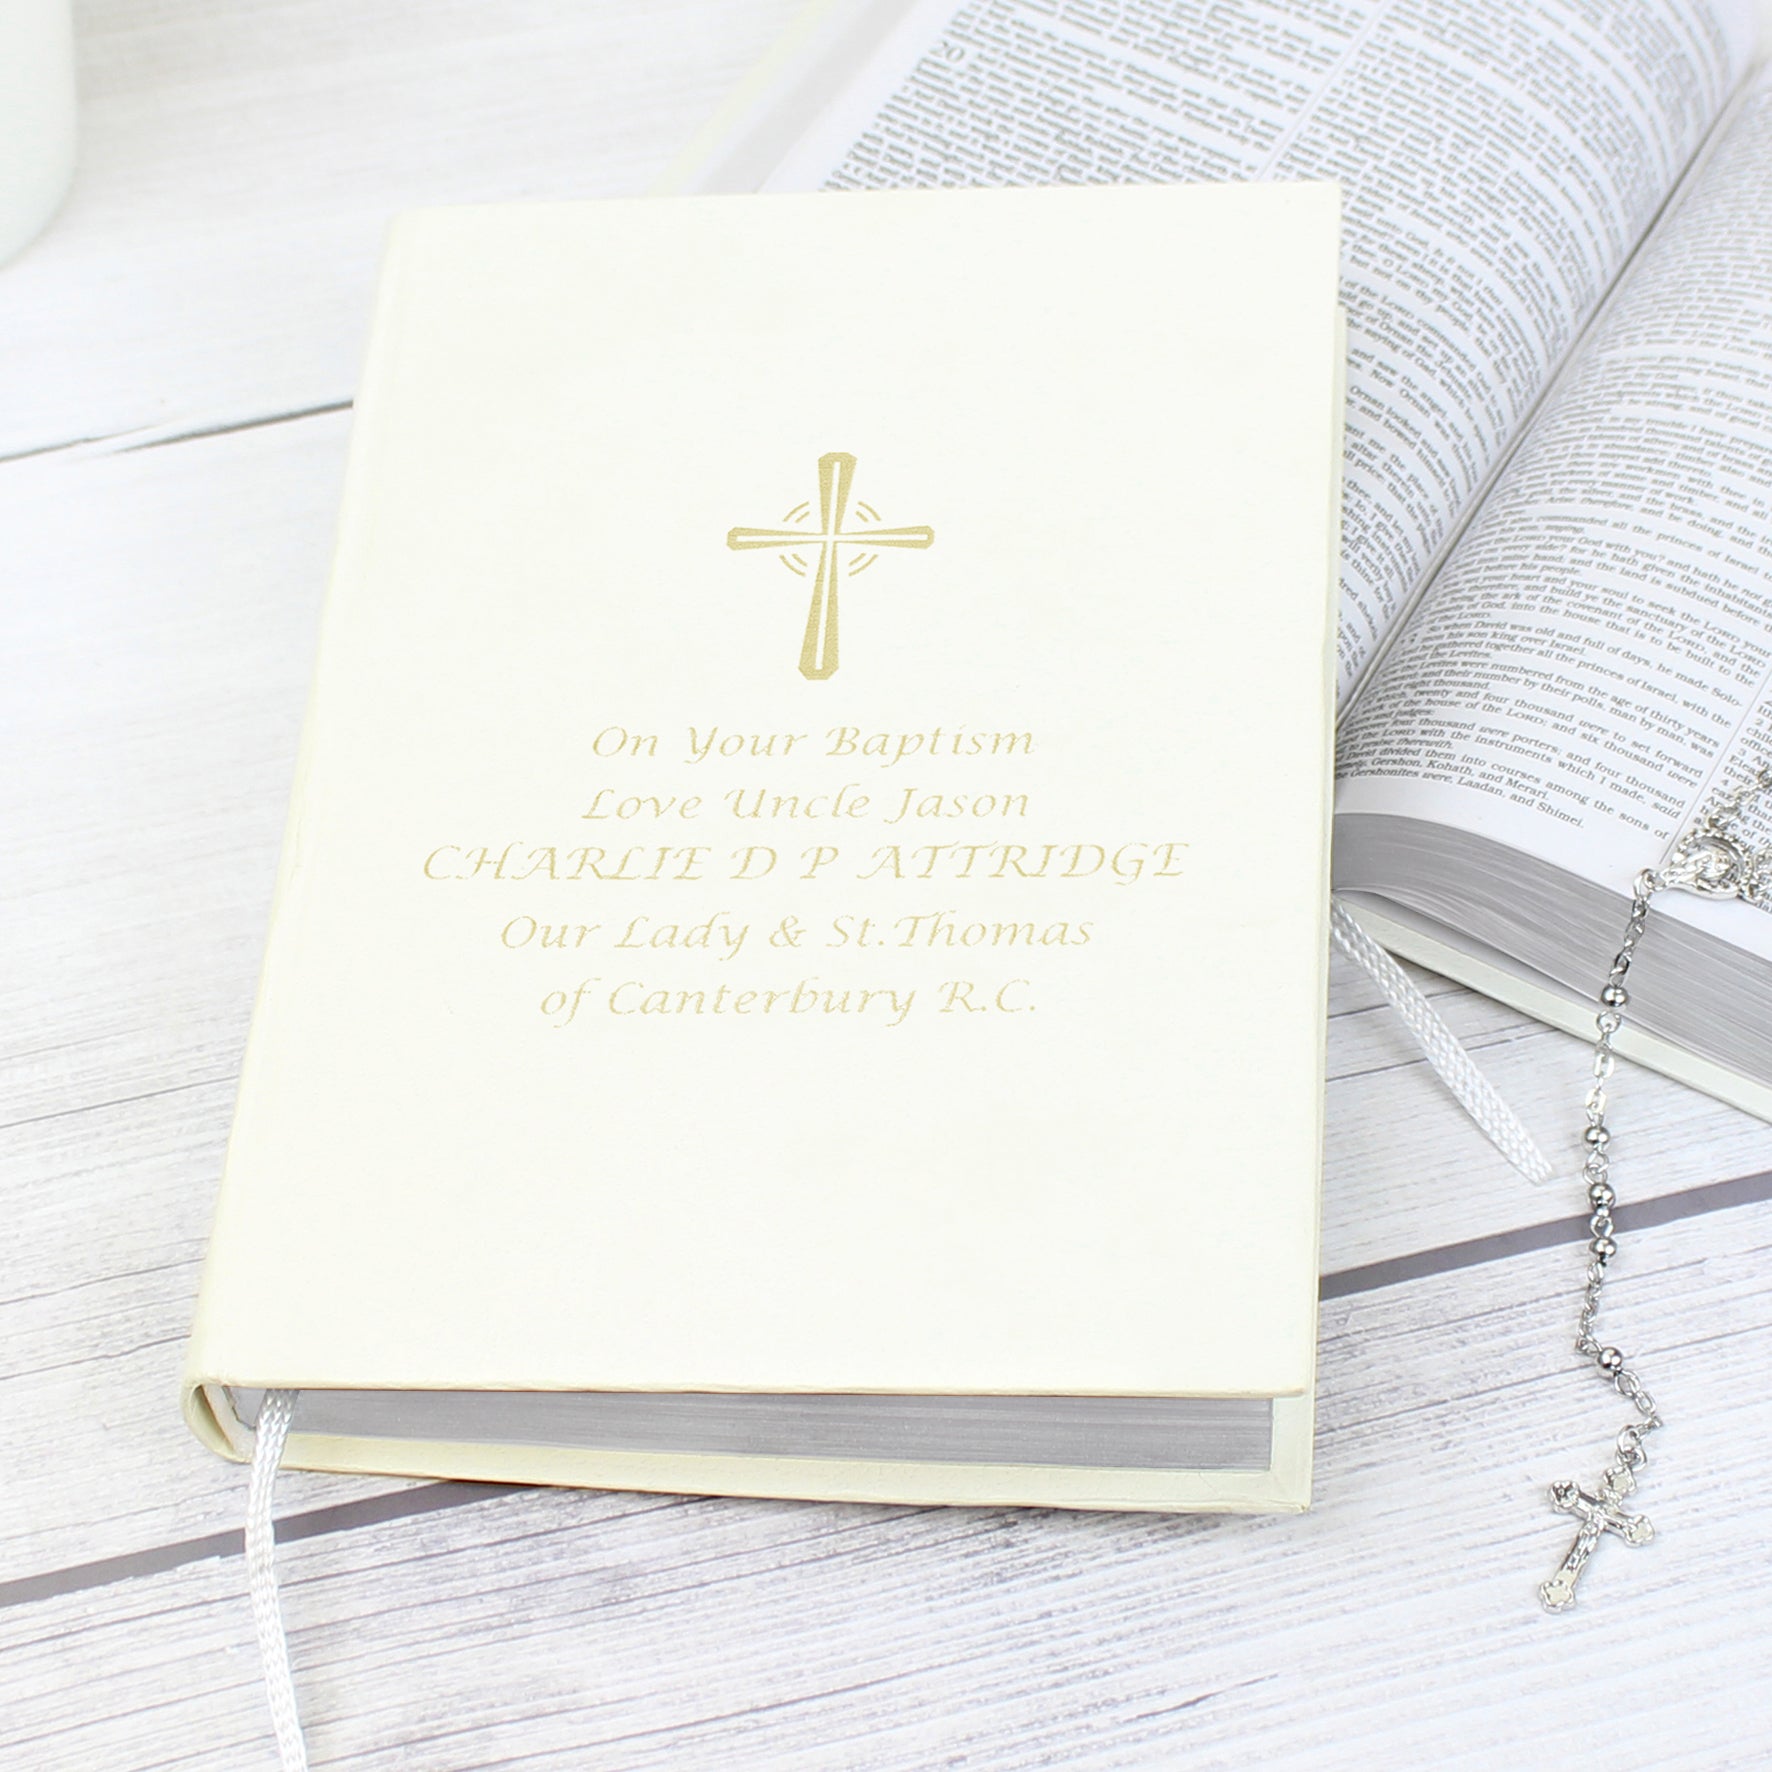 Image of a bible with white cover that can be personalised with 5 lines of your own text. A cross is printed above the text, all of which is printed in gold. The bible has a ribbon bookmark and the pages are made from 100% recycled paper.